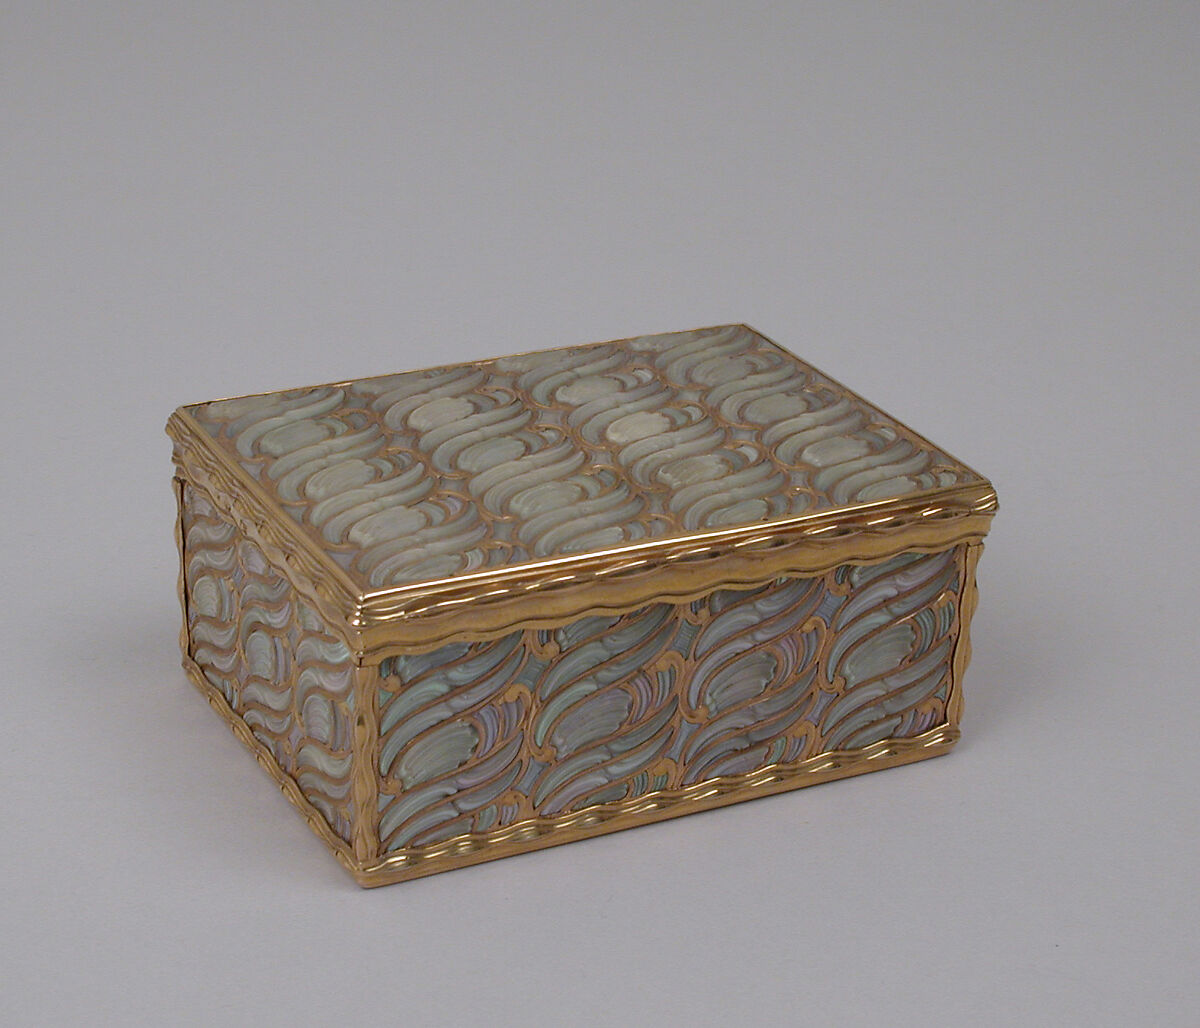 Snuffbox, Gold, mother-of-pearl, French, Paris